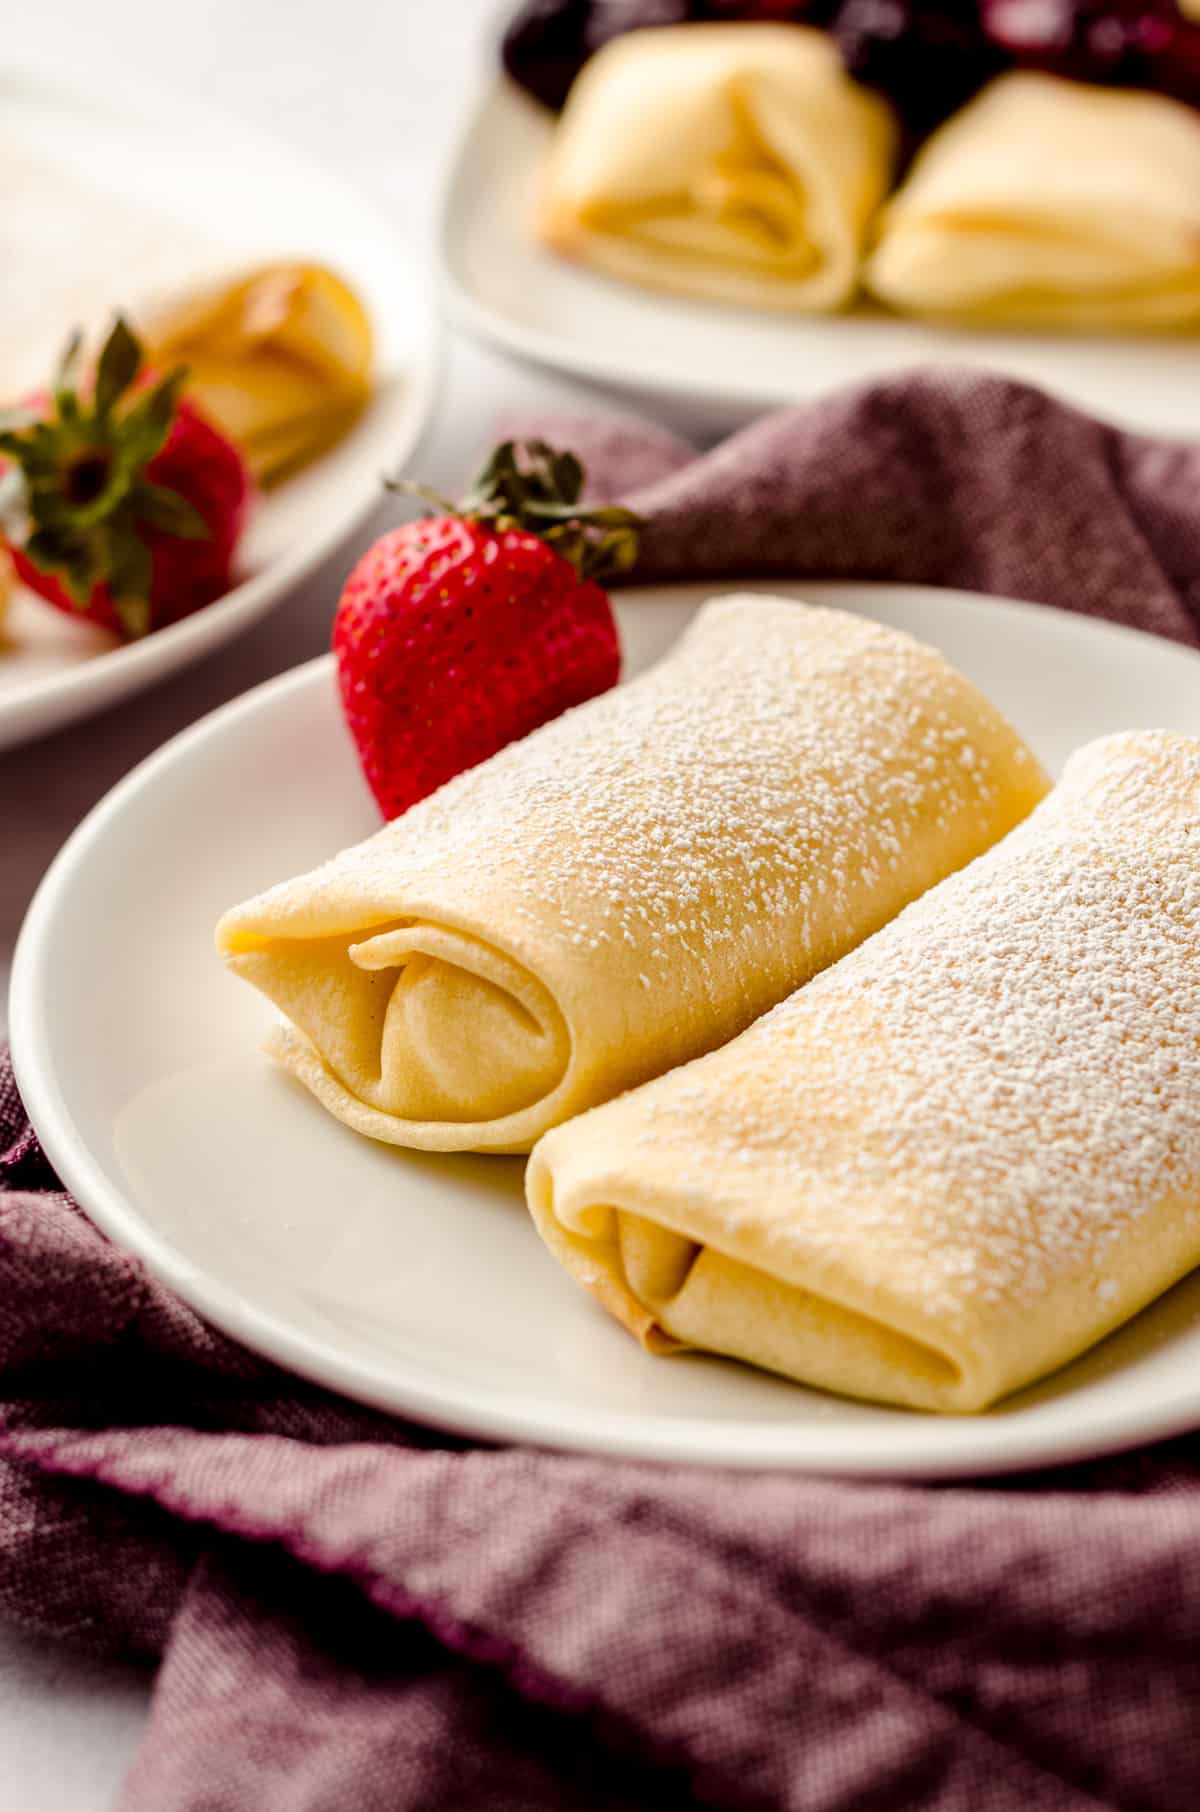 Two rolled cheese blintzes, garnished with a strawberry.